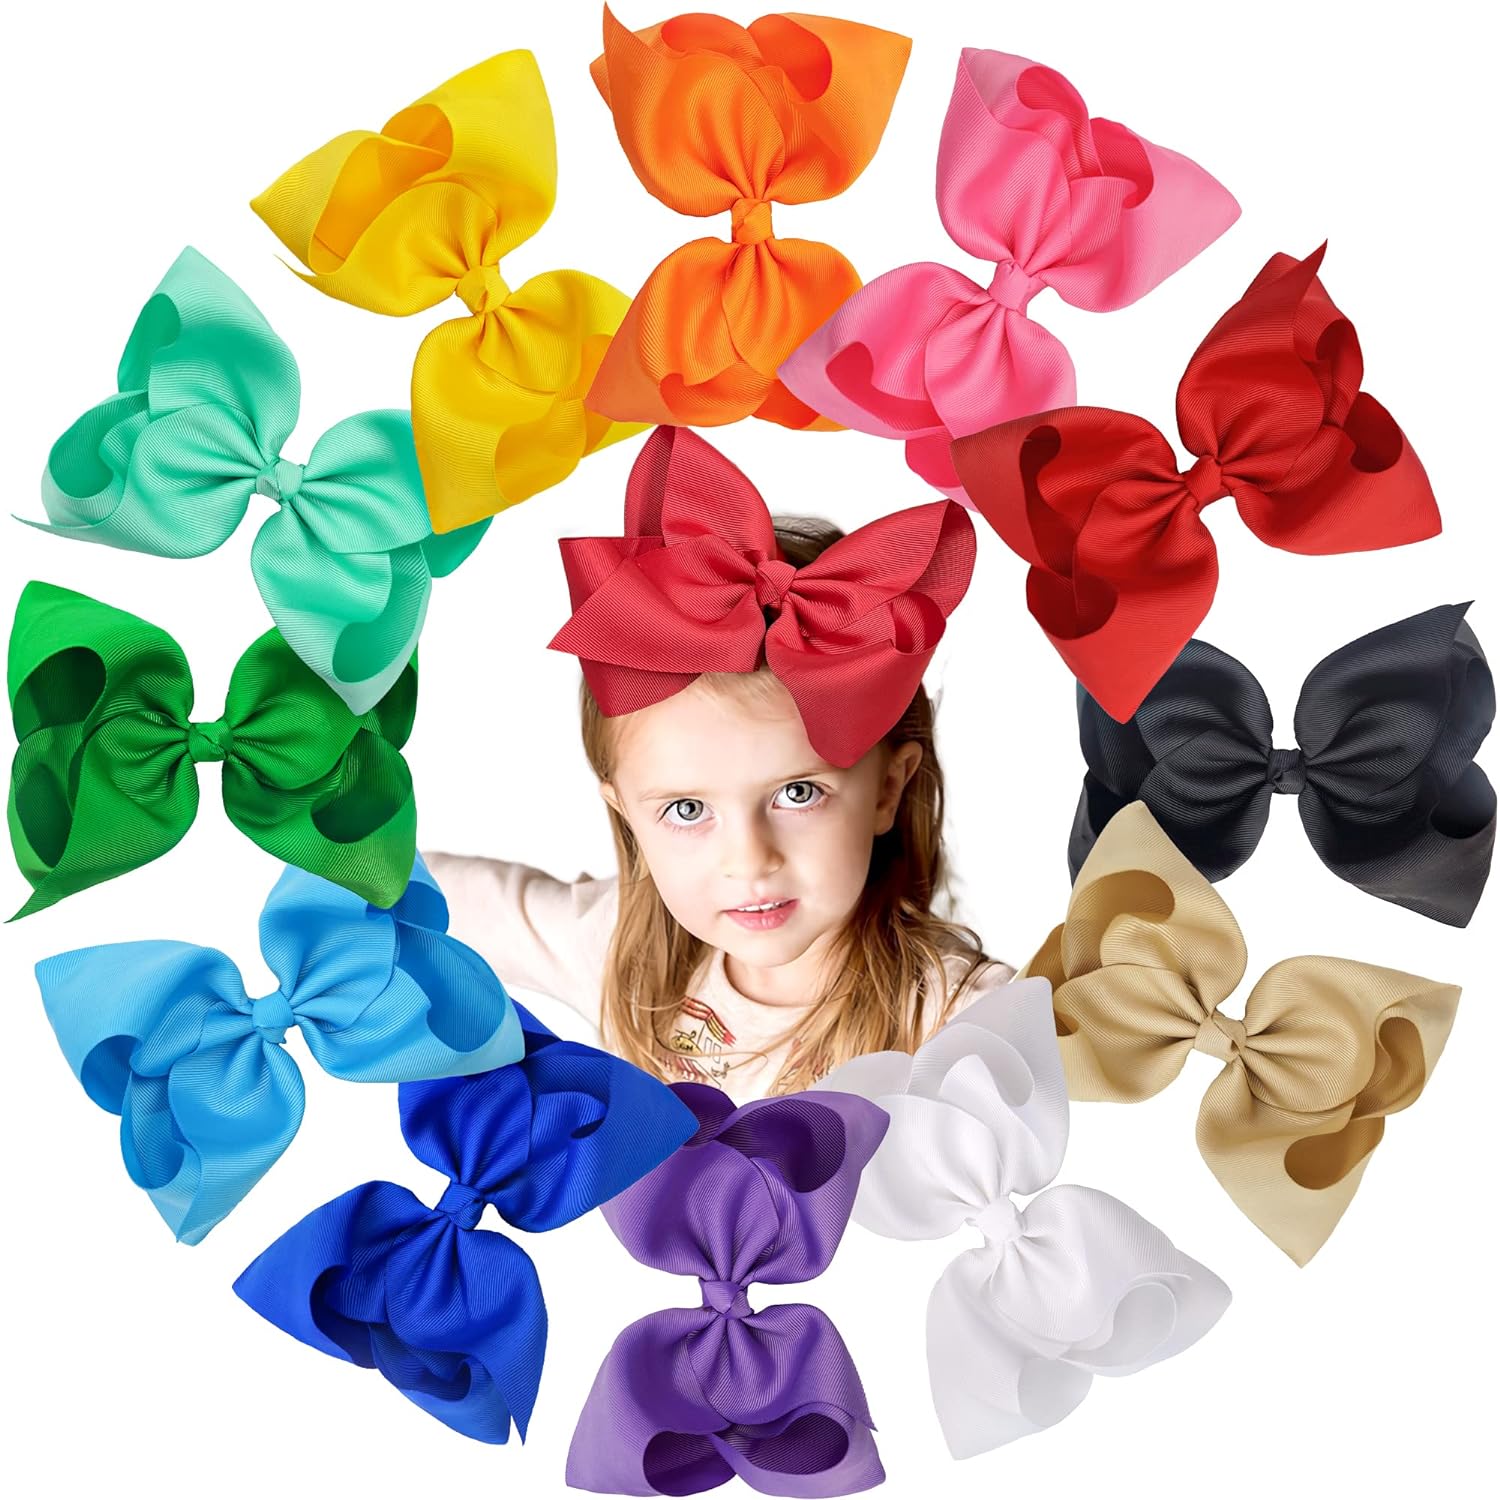 Hottest Amazon Deal Today: CÉLLOT Boutique Teens Girls Big Hair Bows Clips - Limited Stock!